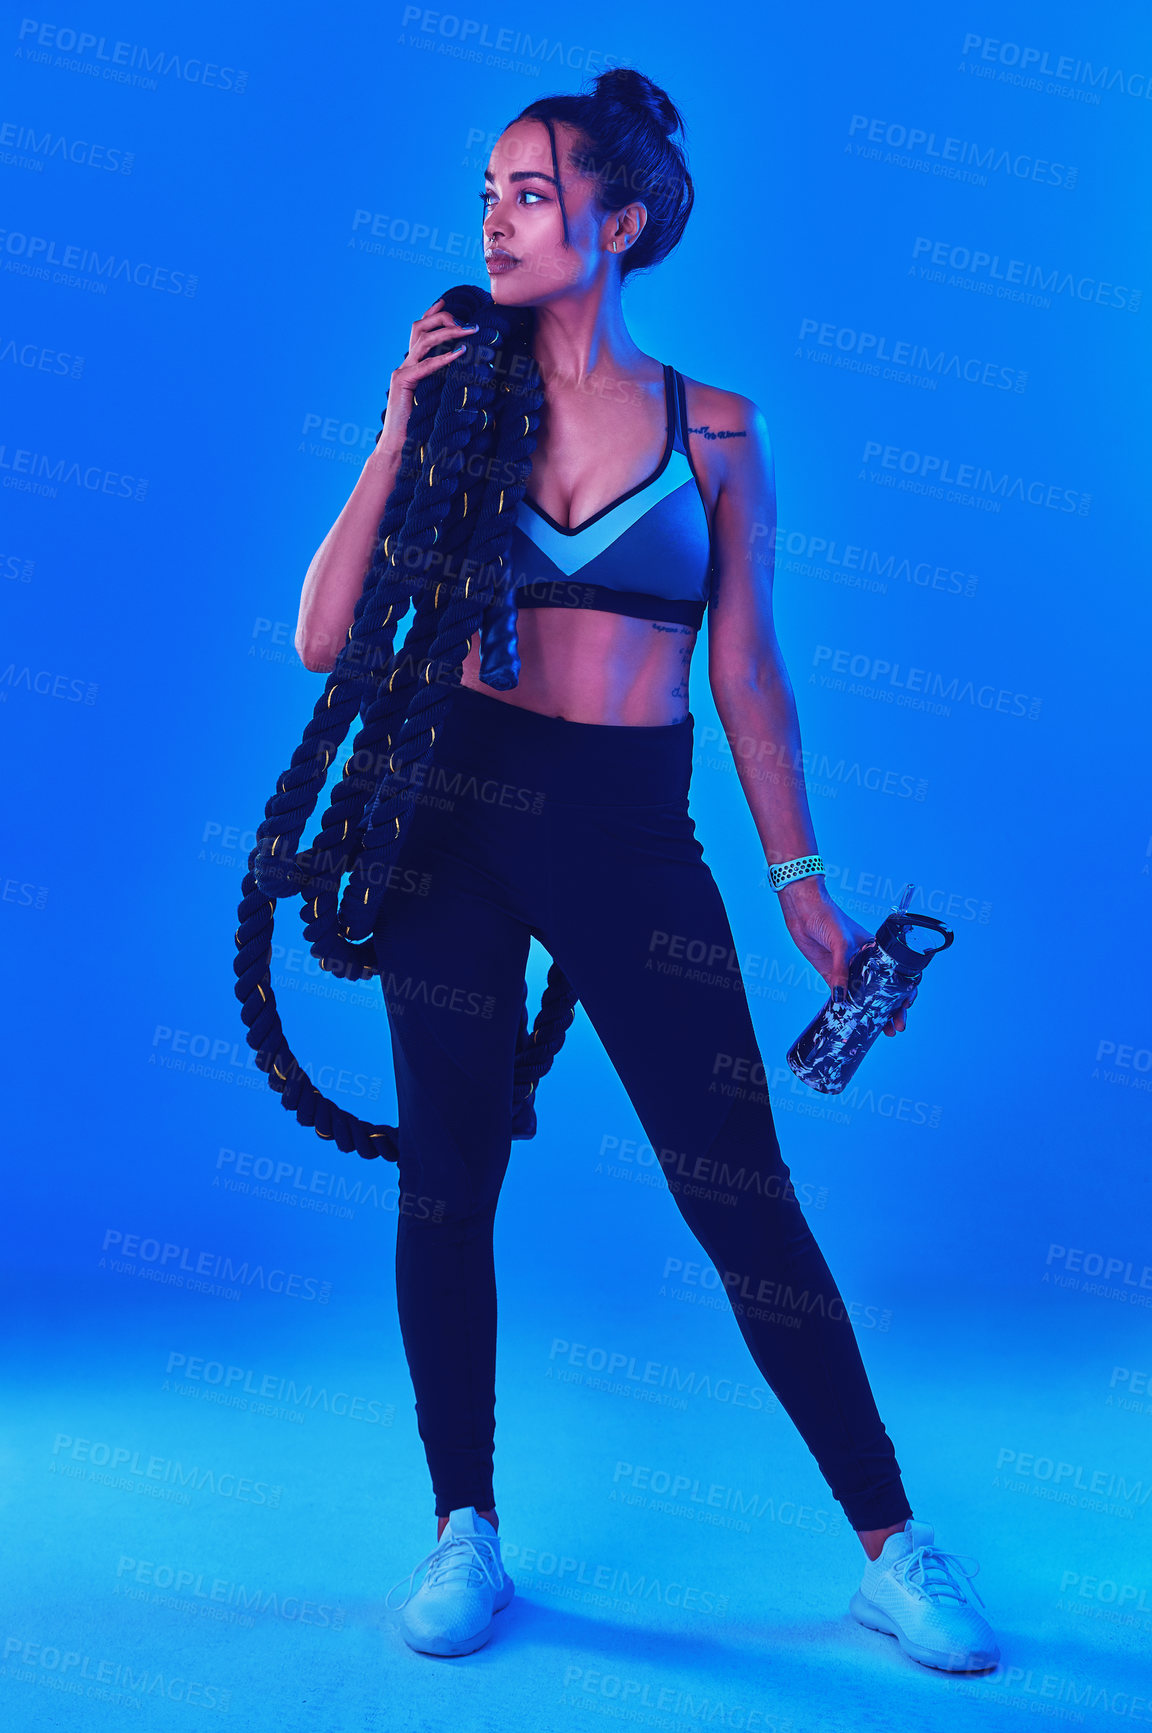 Buy stock photo Full length shot of an attractive young sportswoman posing carrying battle ropes against a blue background